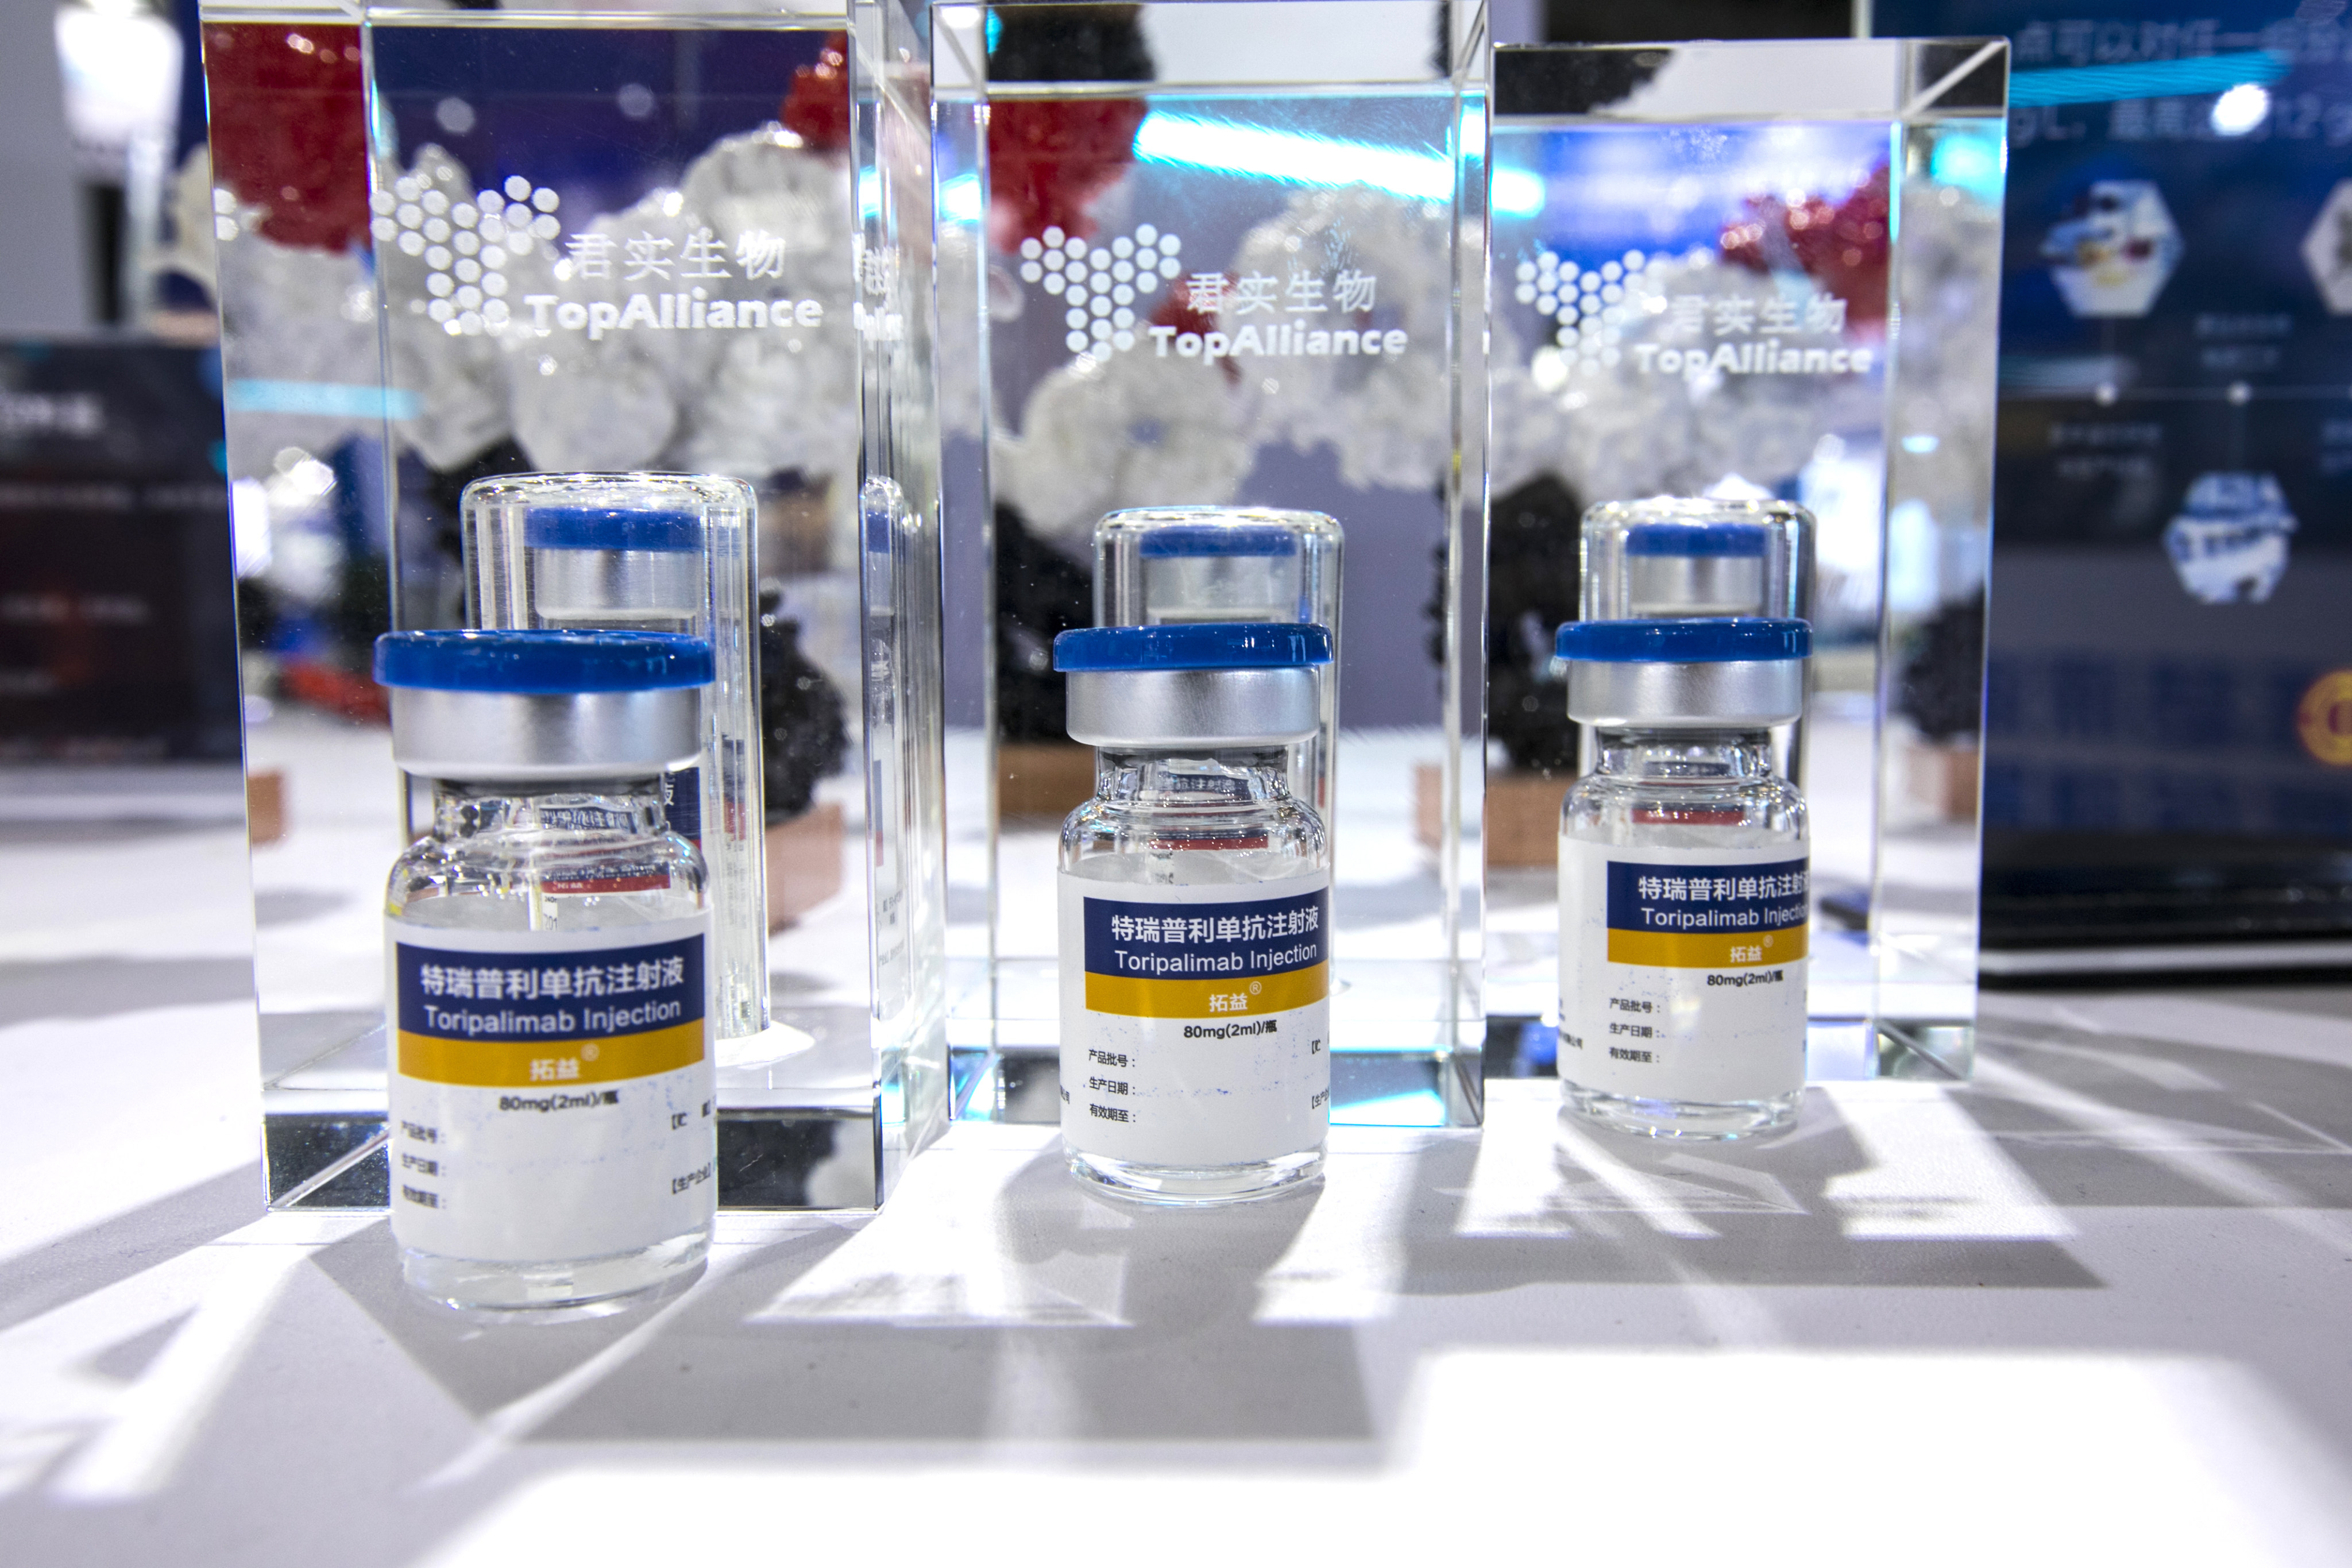 Vials of Toripalimab Injection are displayed by Shanghai Junshi Biosciences during the 8th China International Technology Fair. Photo: VCG via Getty Images